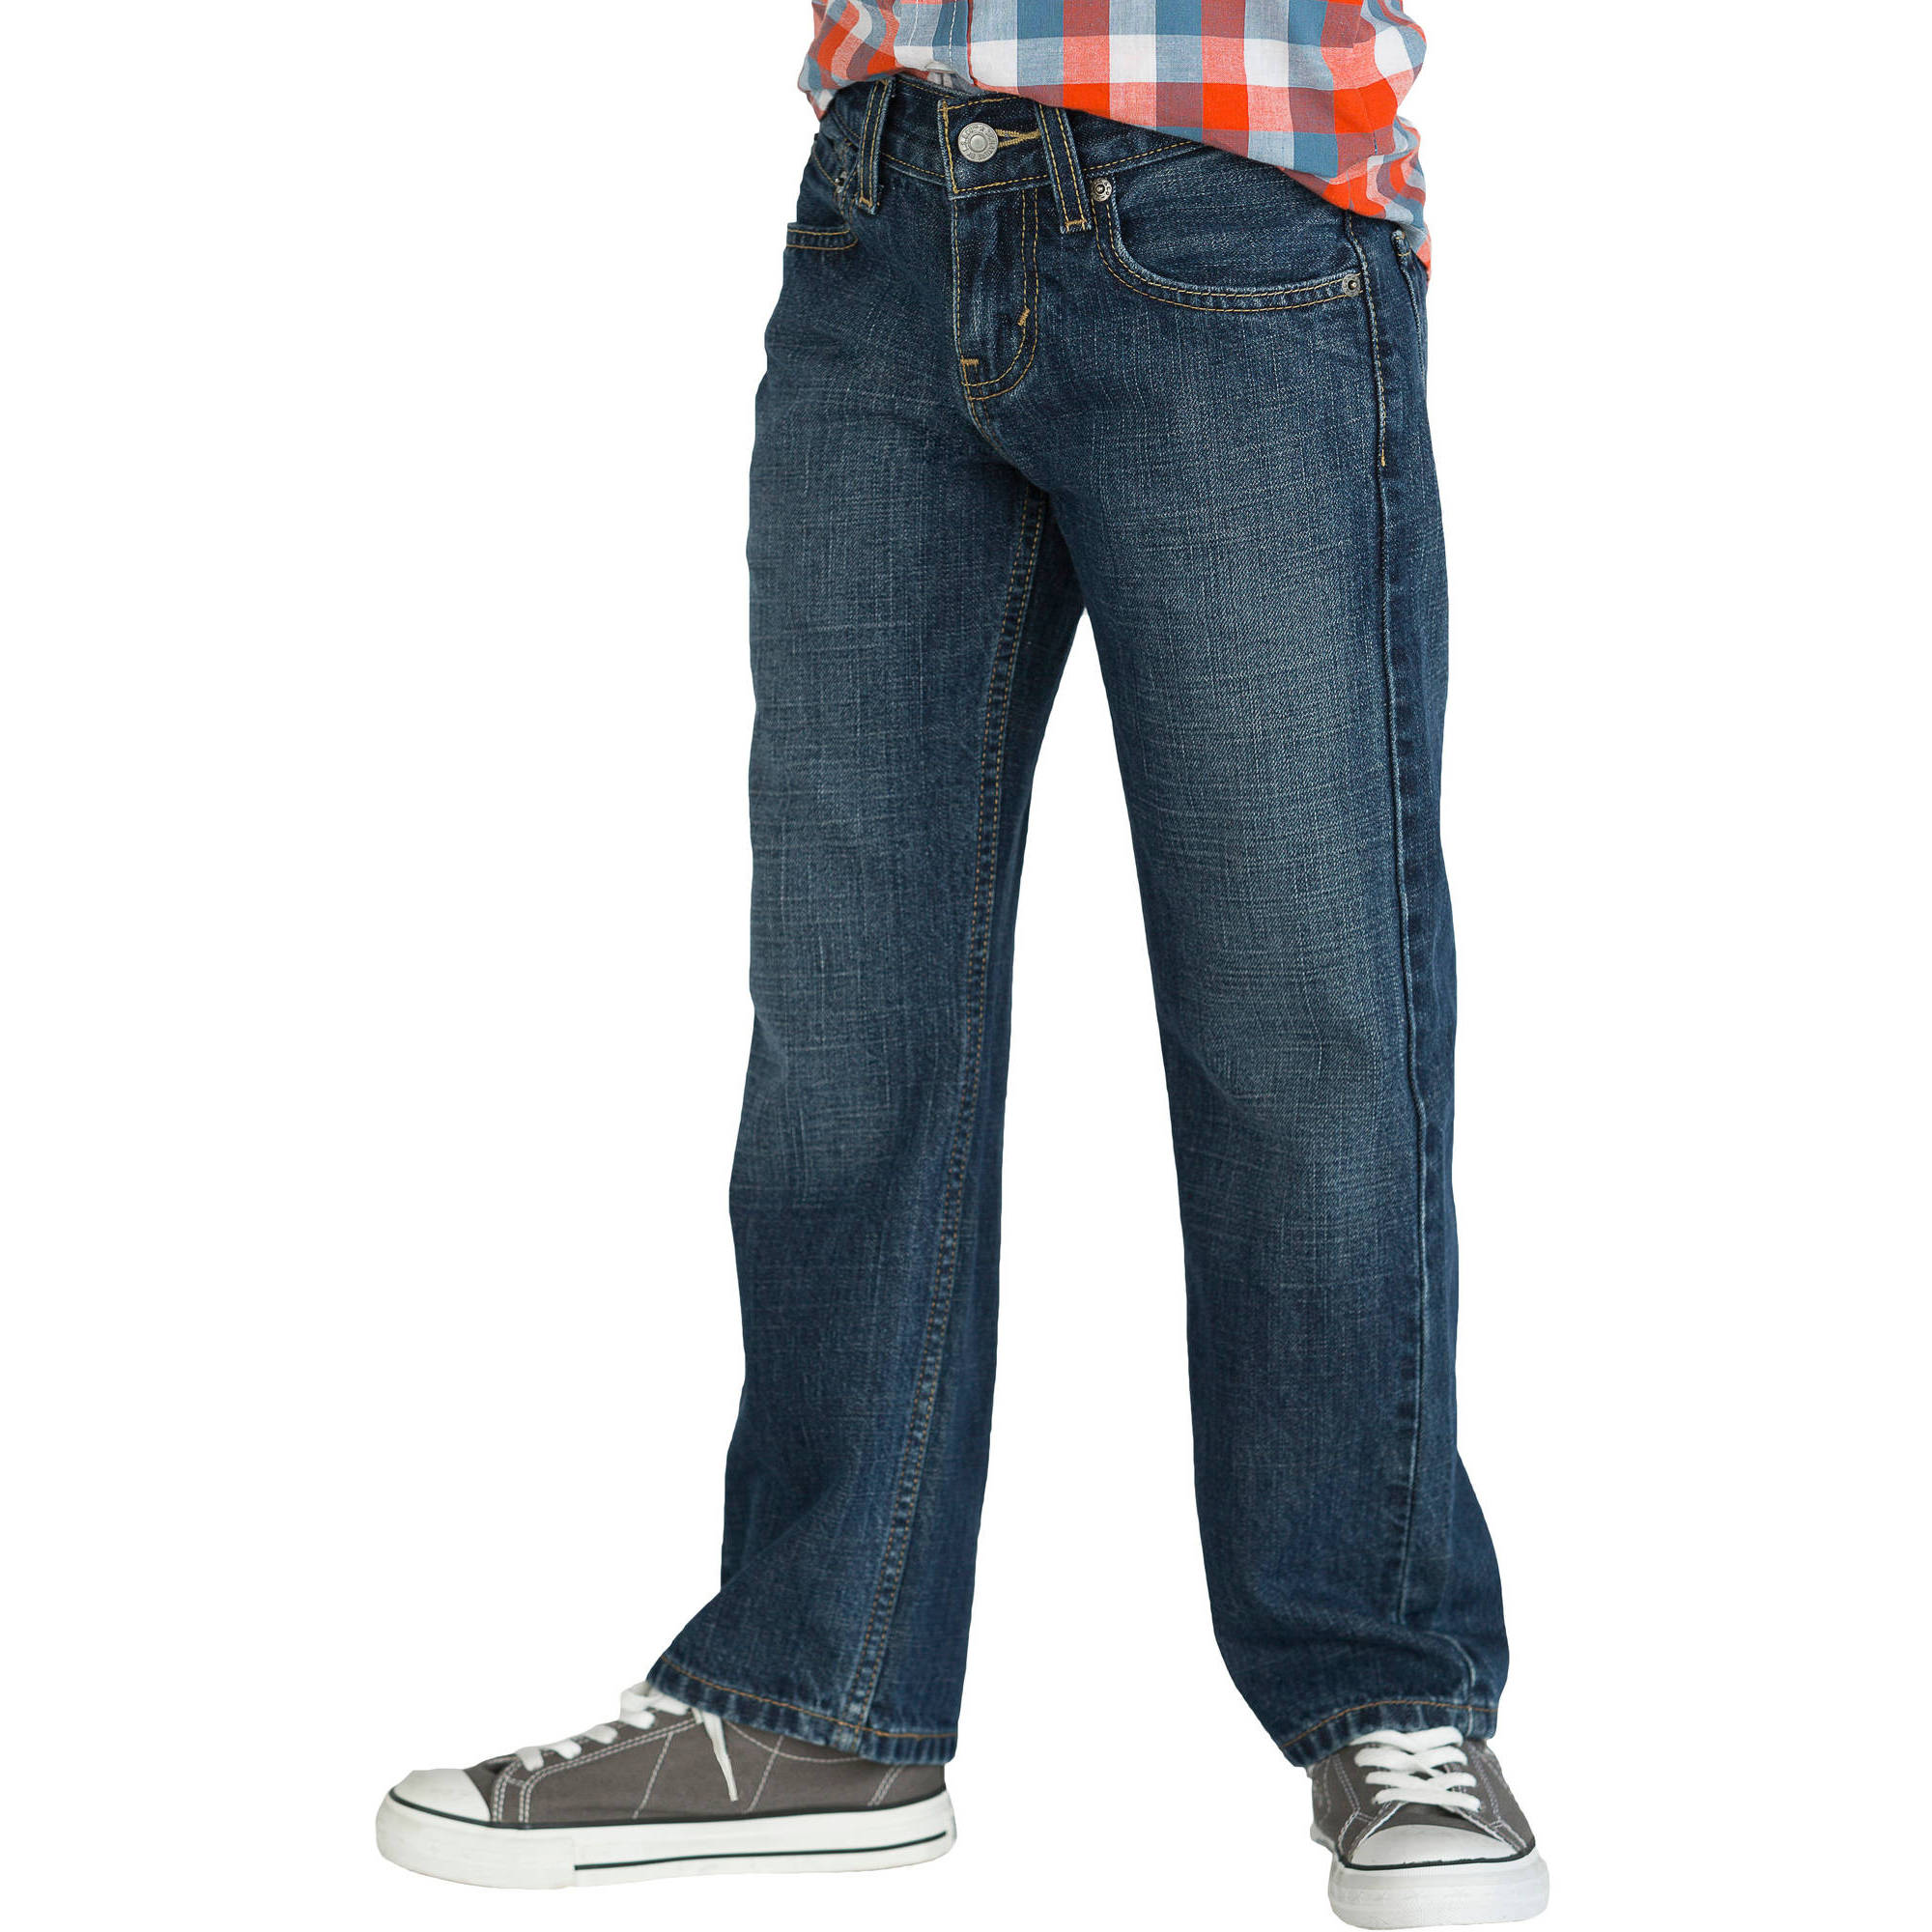 Boy's Relaxed Fit Jeans - image 1 of 2